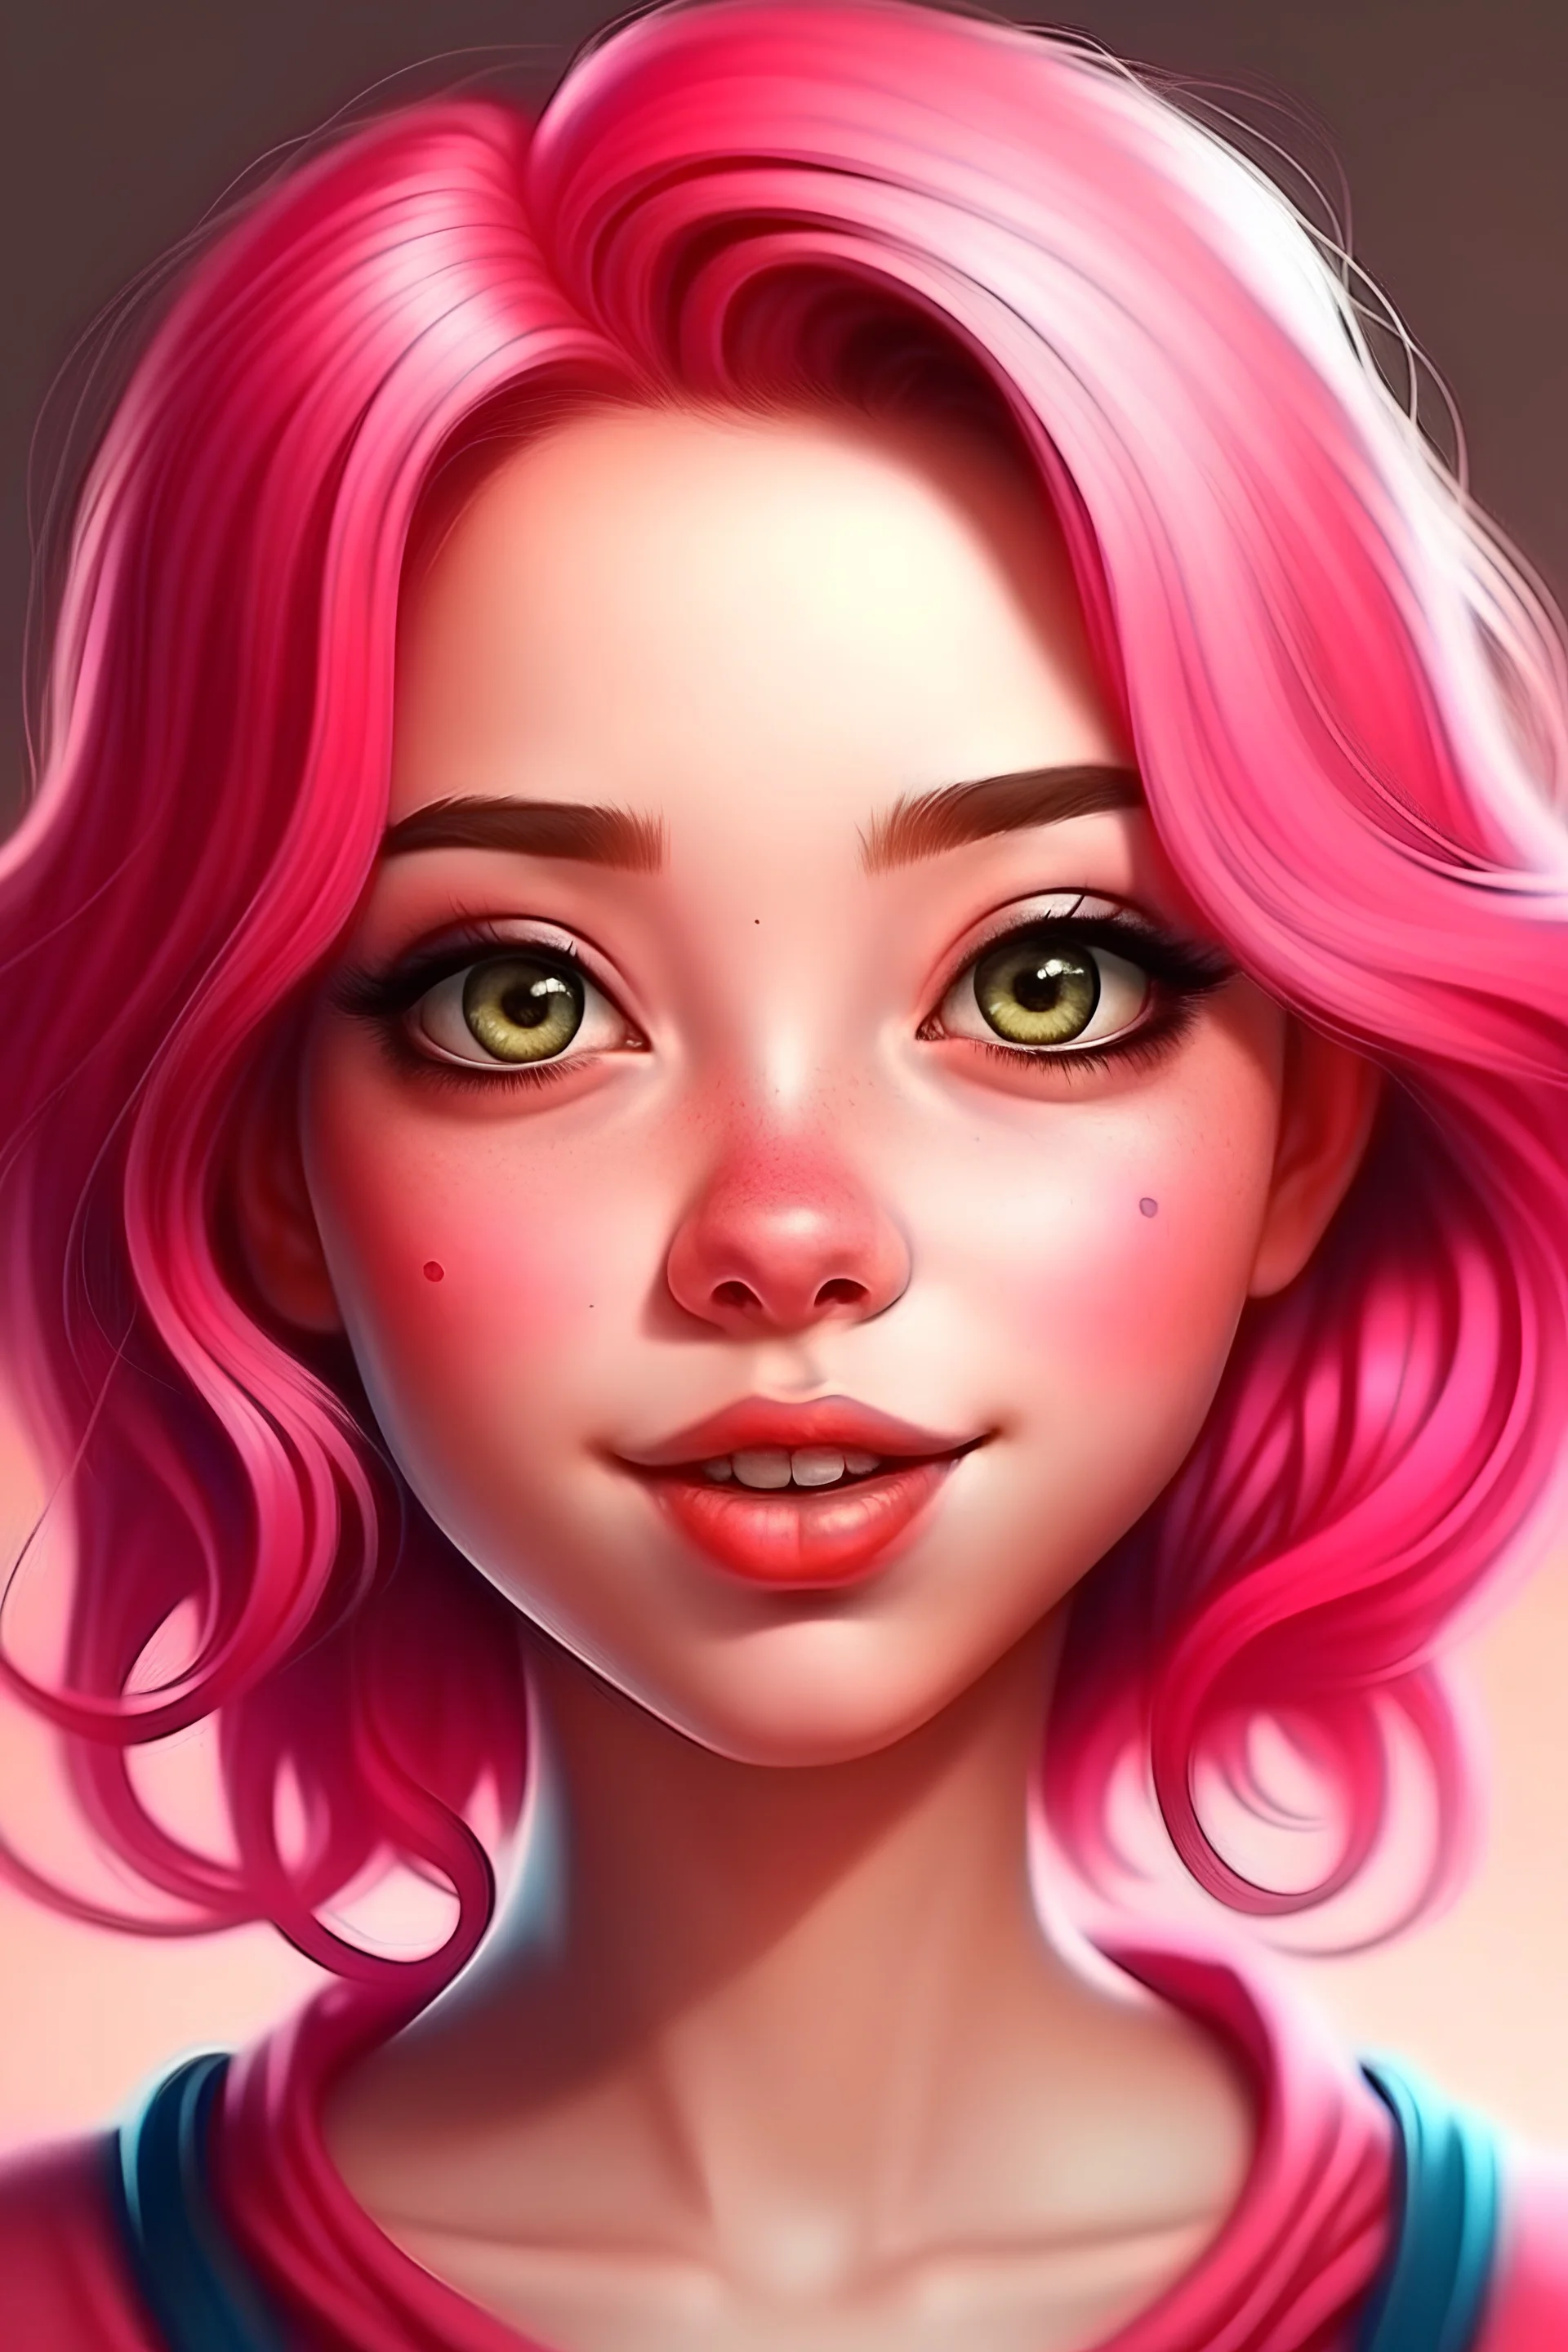 Create cute girl with pink hair in realistic style to instagram